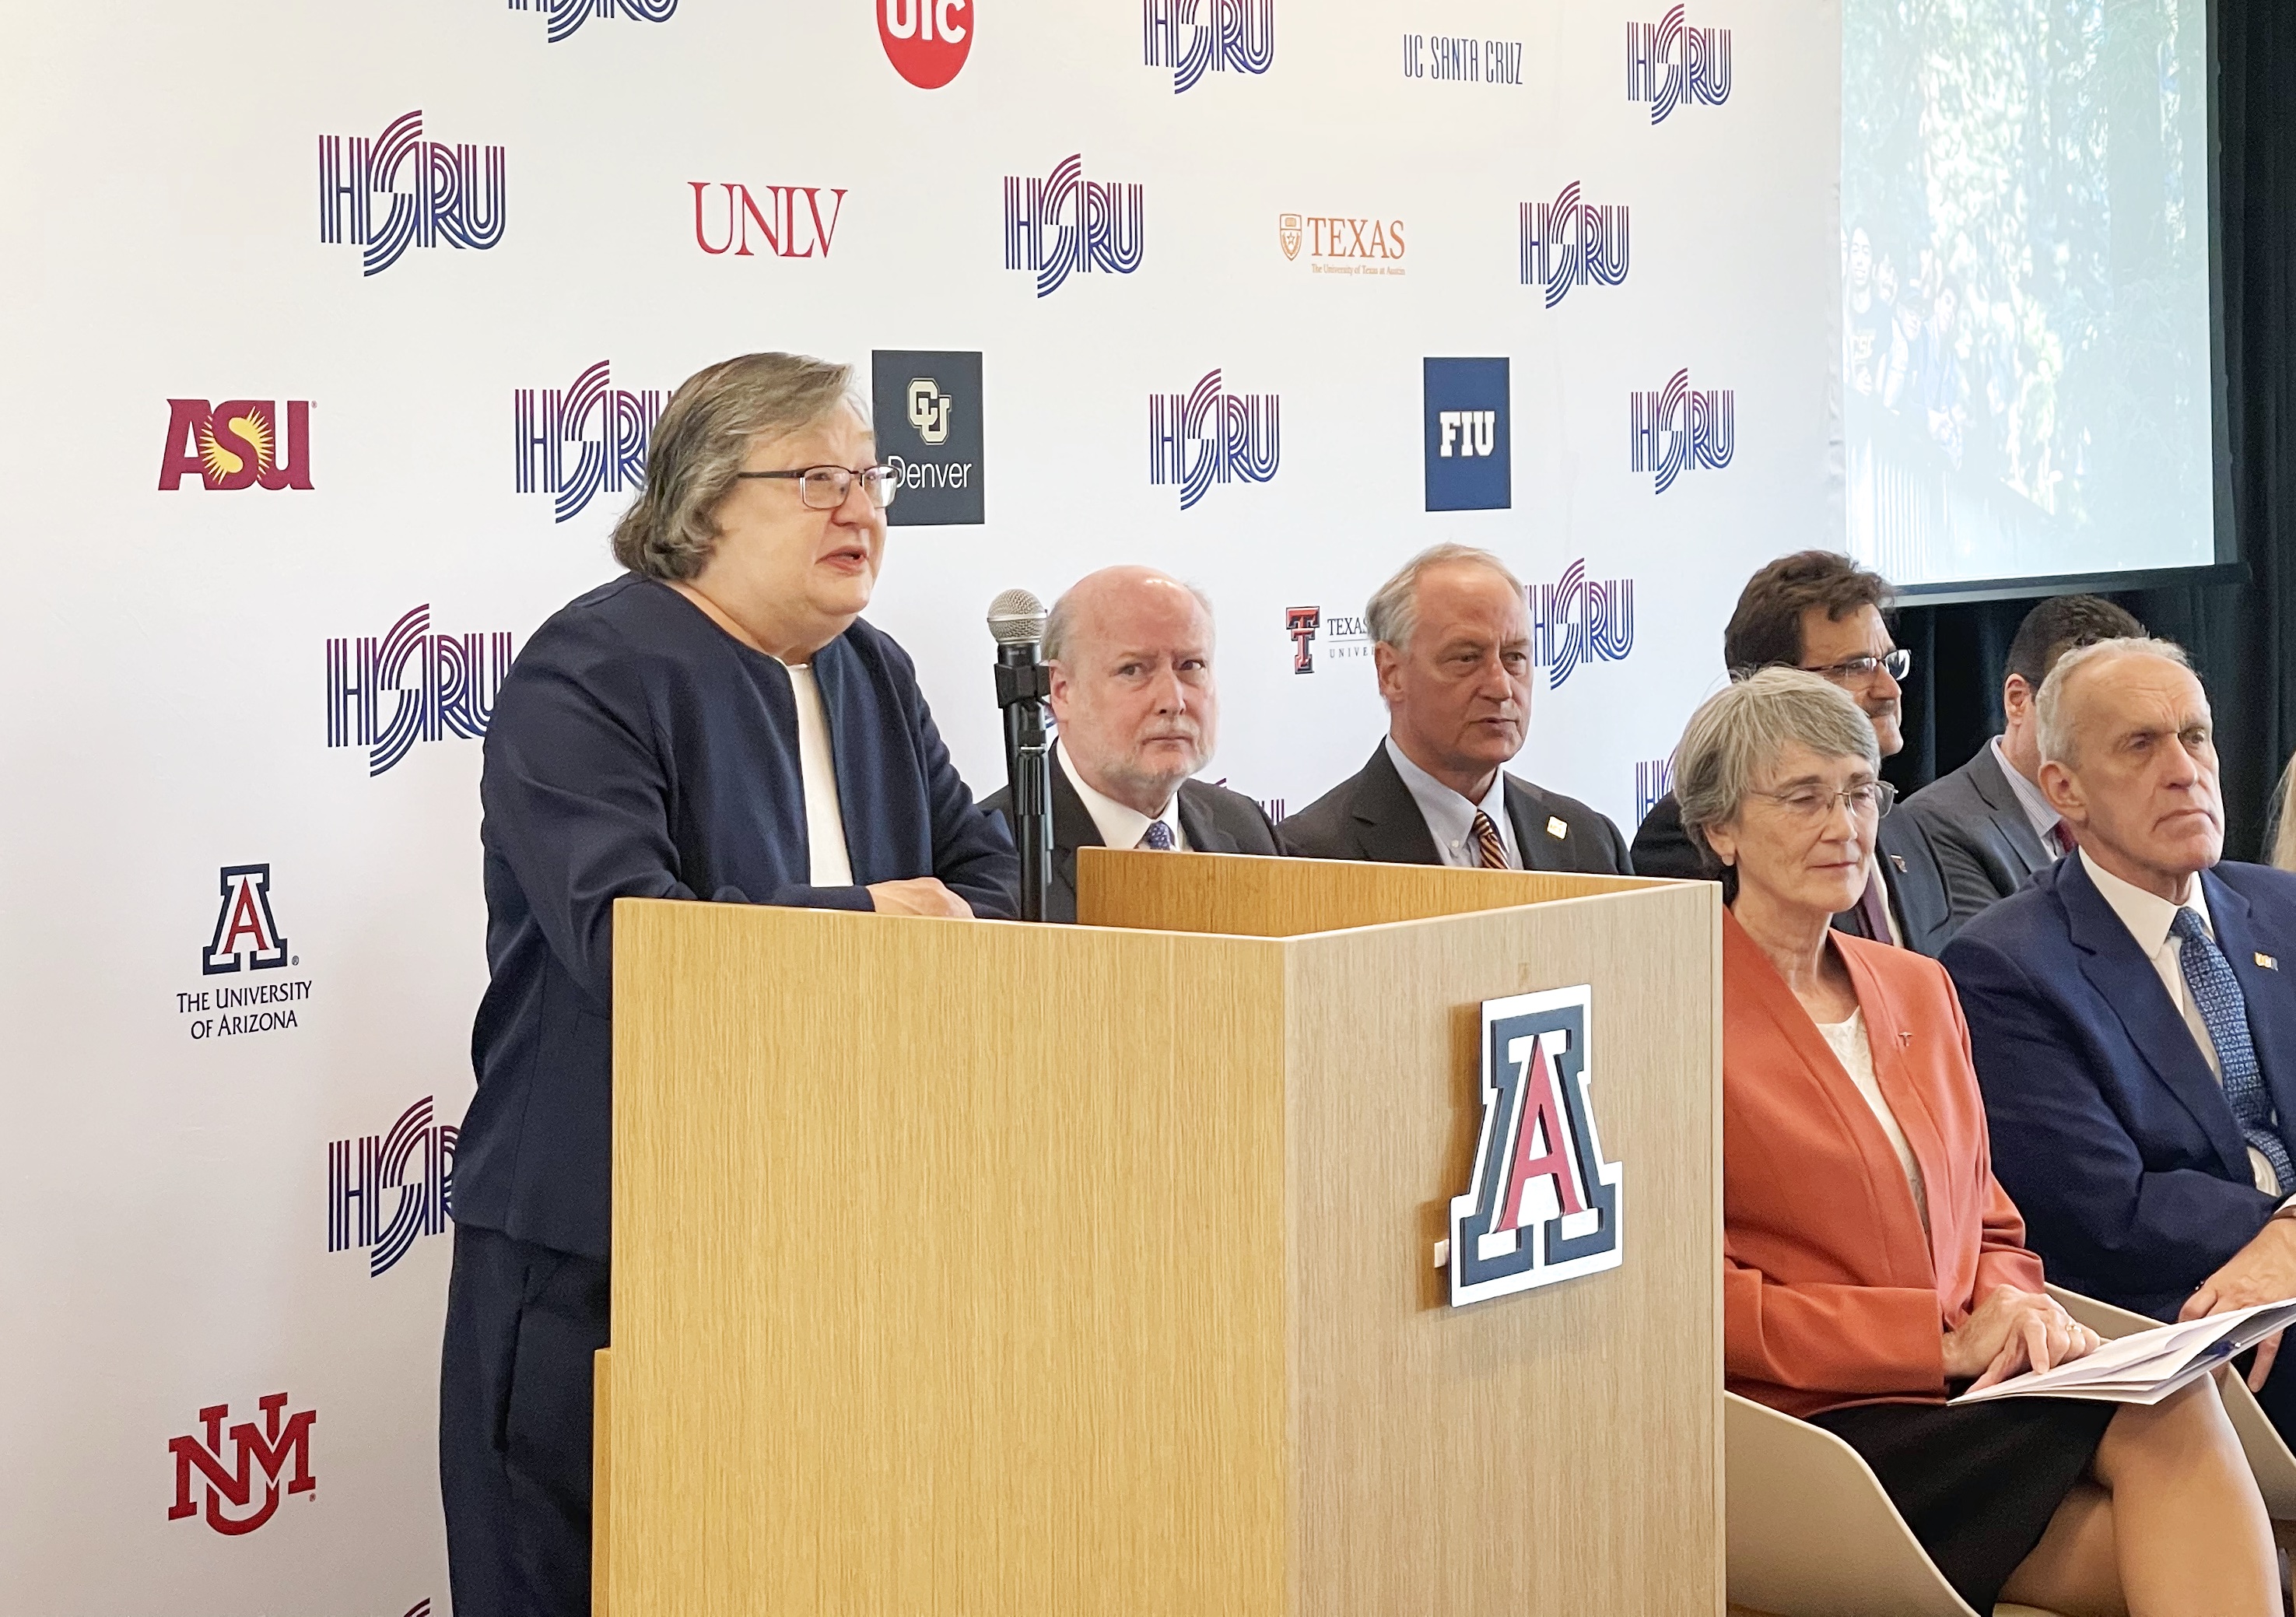 Chancellor Cynthia Larive speaking during the announcement